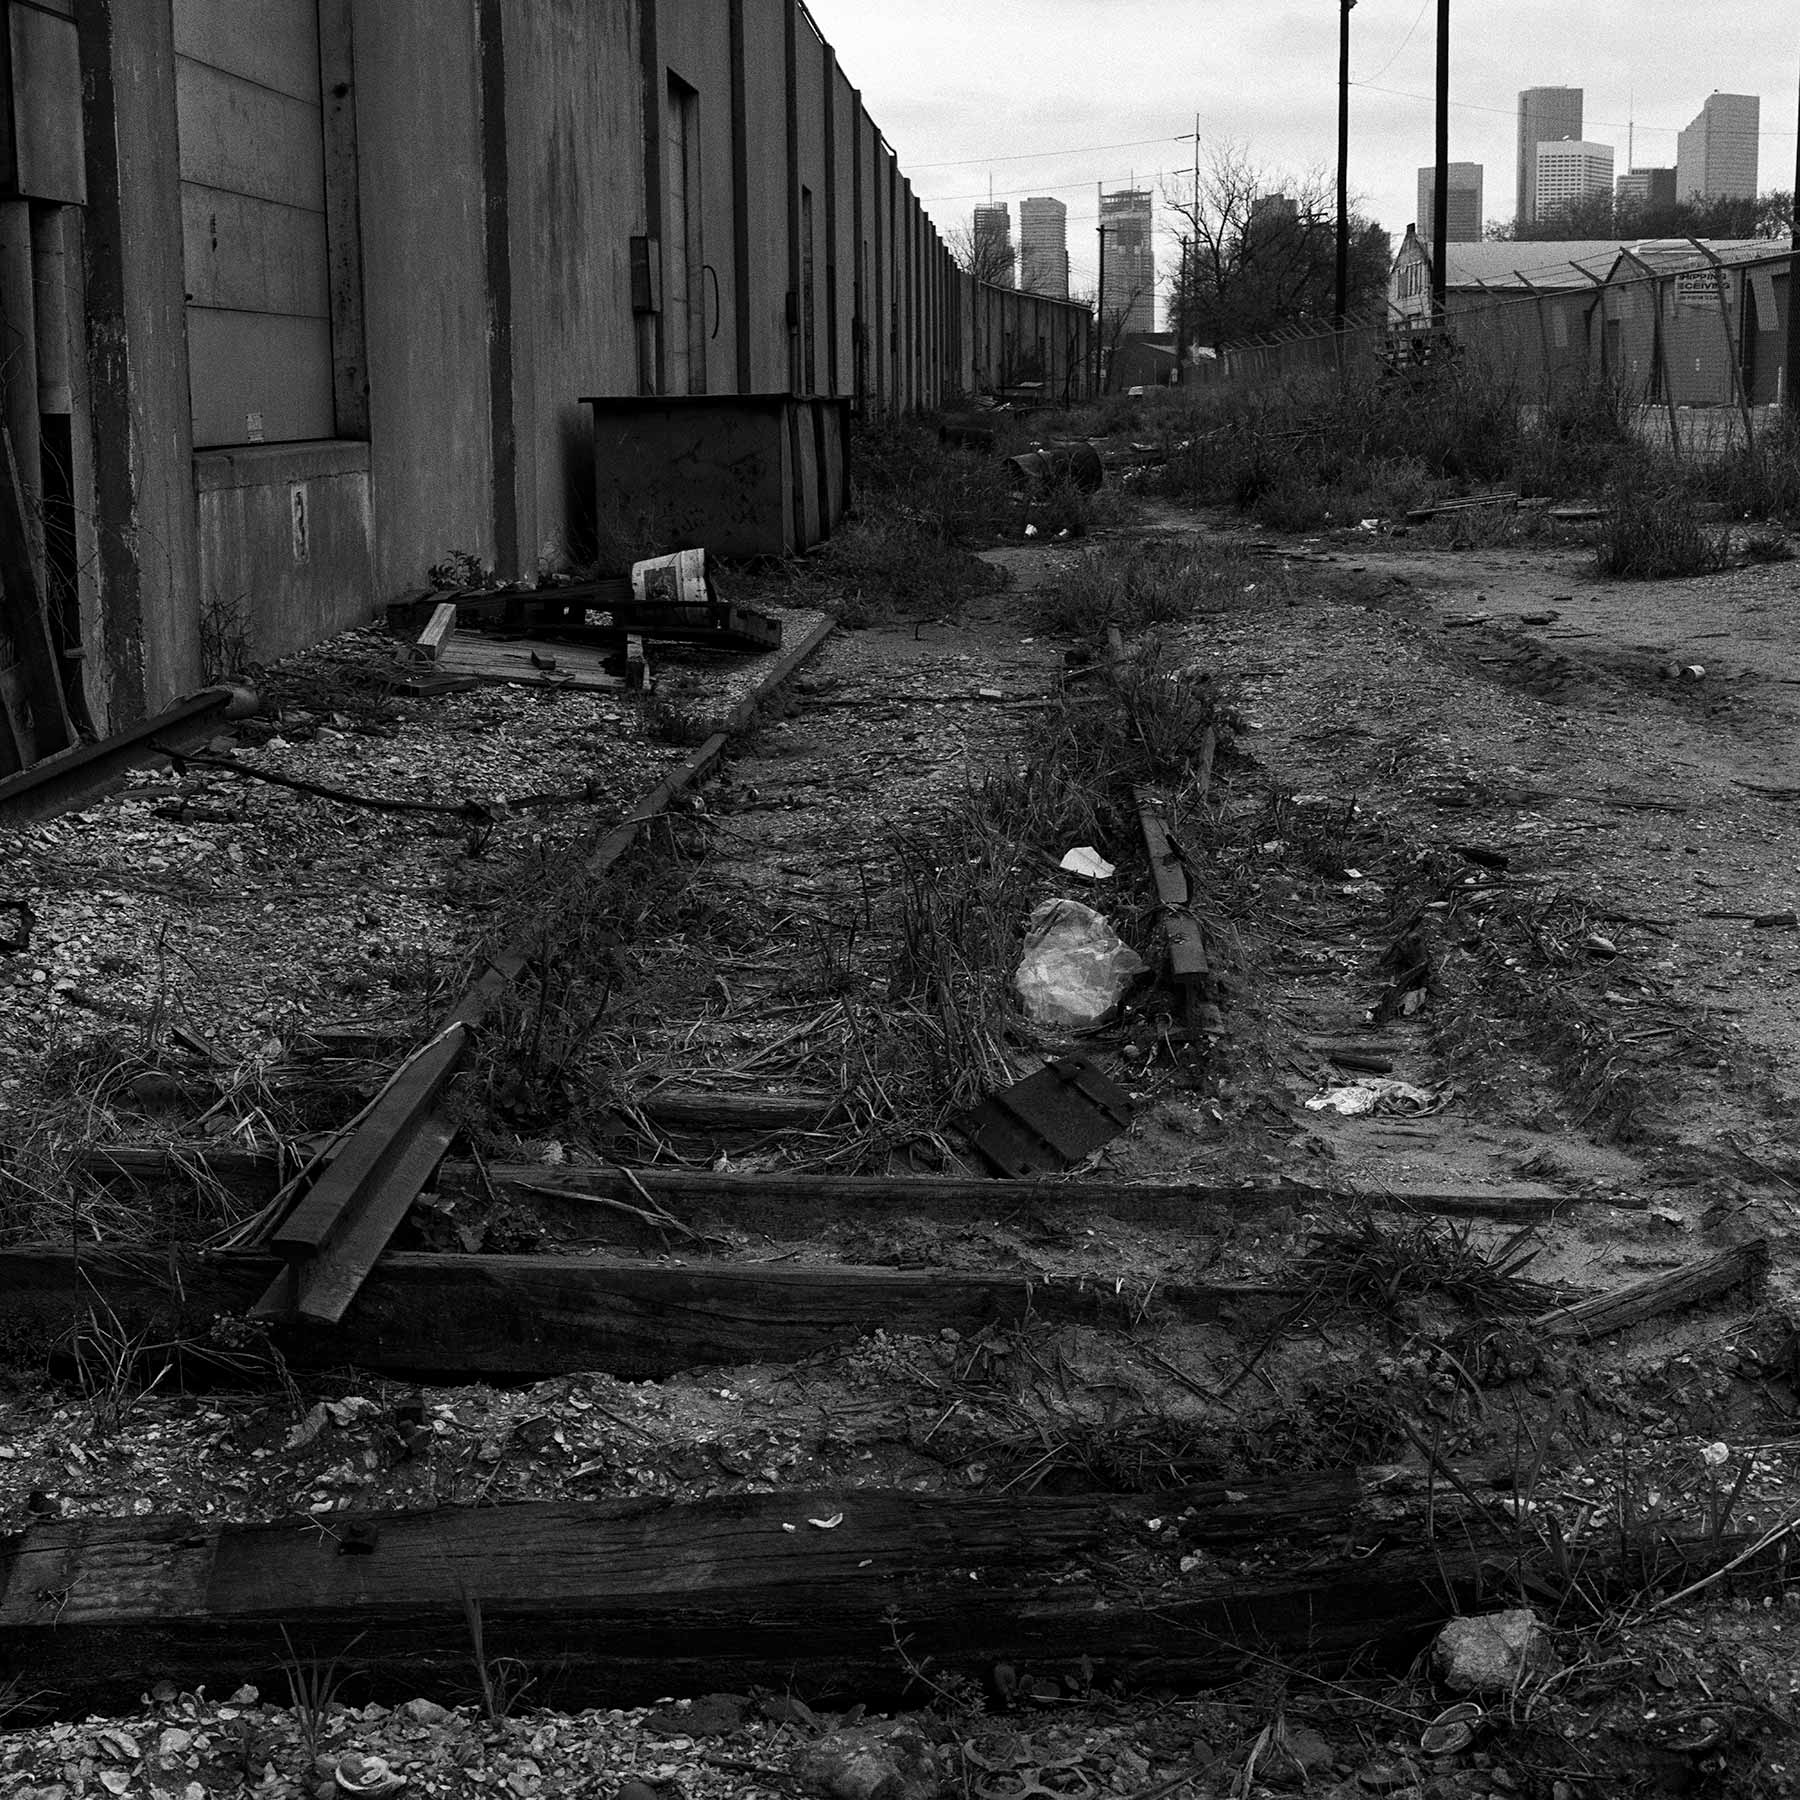 Dismantled railroad track – East Downtown, Huston, Texas, 1983